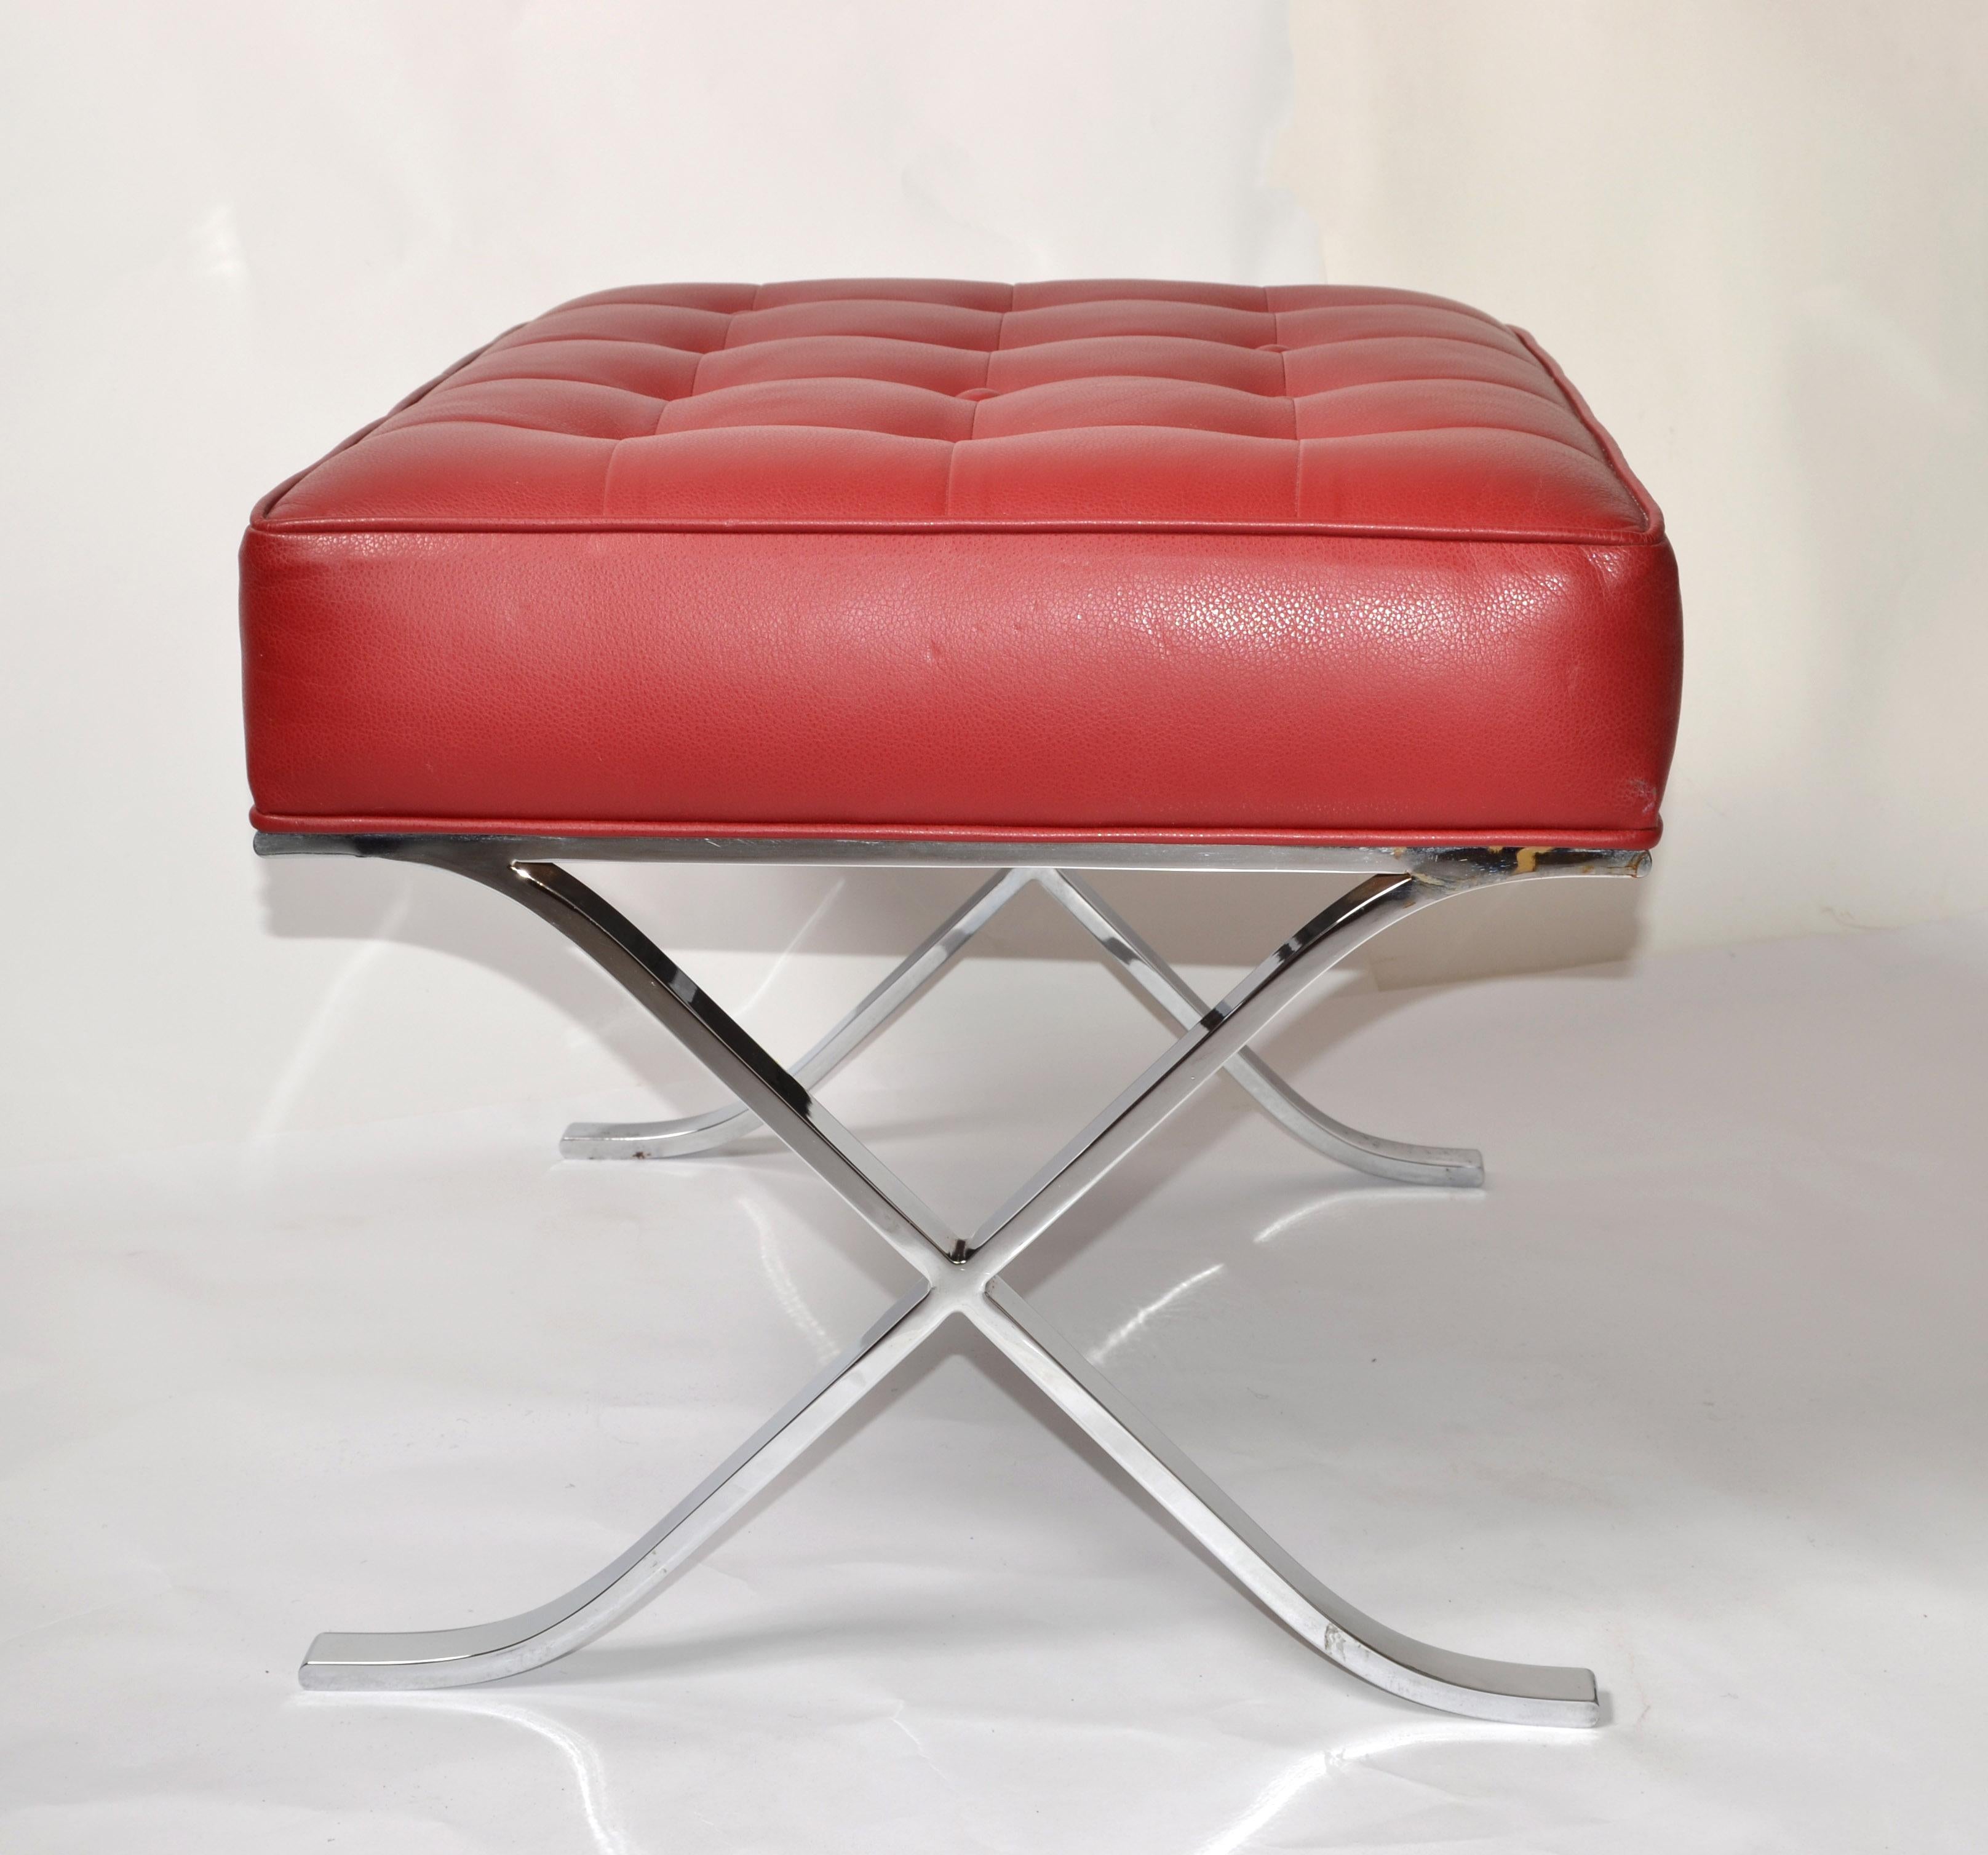 Mies Van Der Rohe Style Barcelona Chromed Steel Red Vinyl Ottoman Footstool 1980 For Sale 3